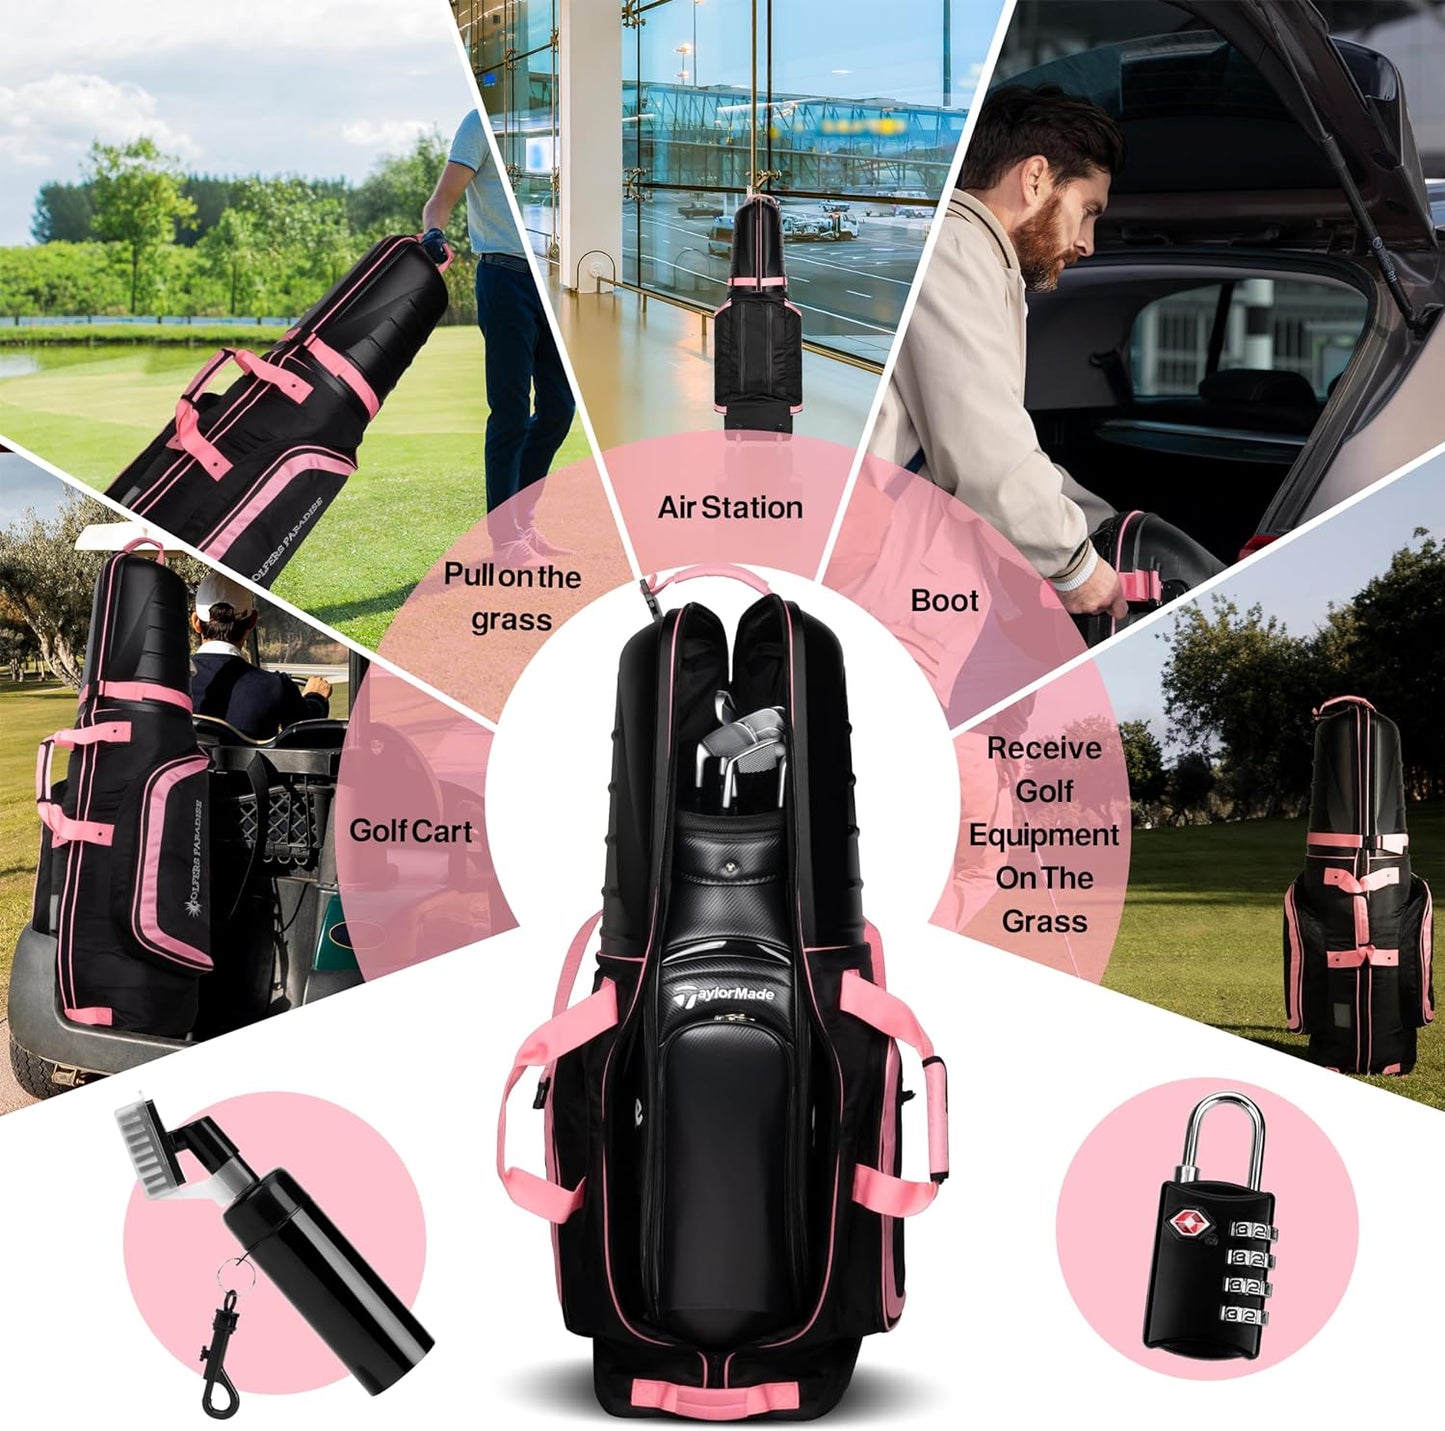 Hard Case Golf Travel Bag - Golf Travel Bag with Wheels & ABS Hard Case Top for Airlines with Password Lock, Easy to Maneuver